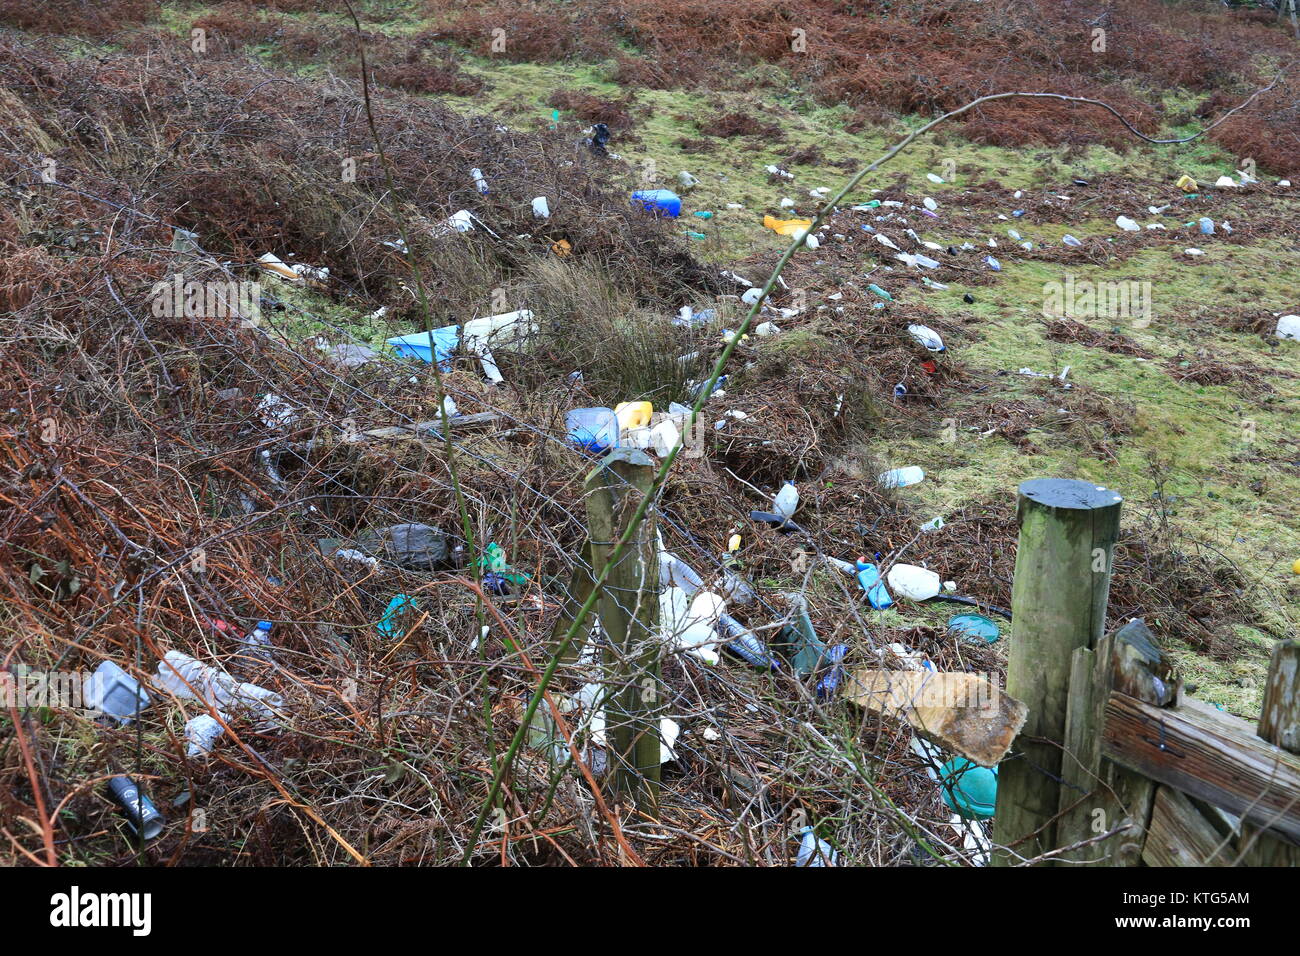 Examples of pollution in the Irish landscape Stock Photo